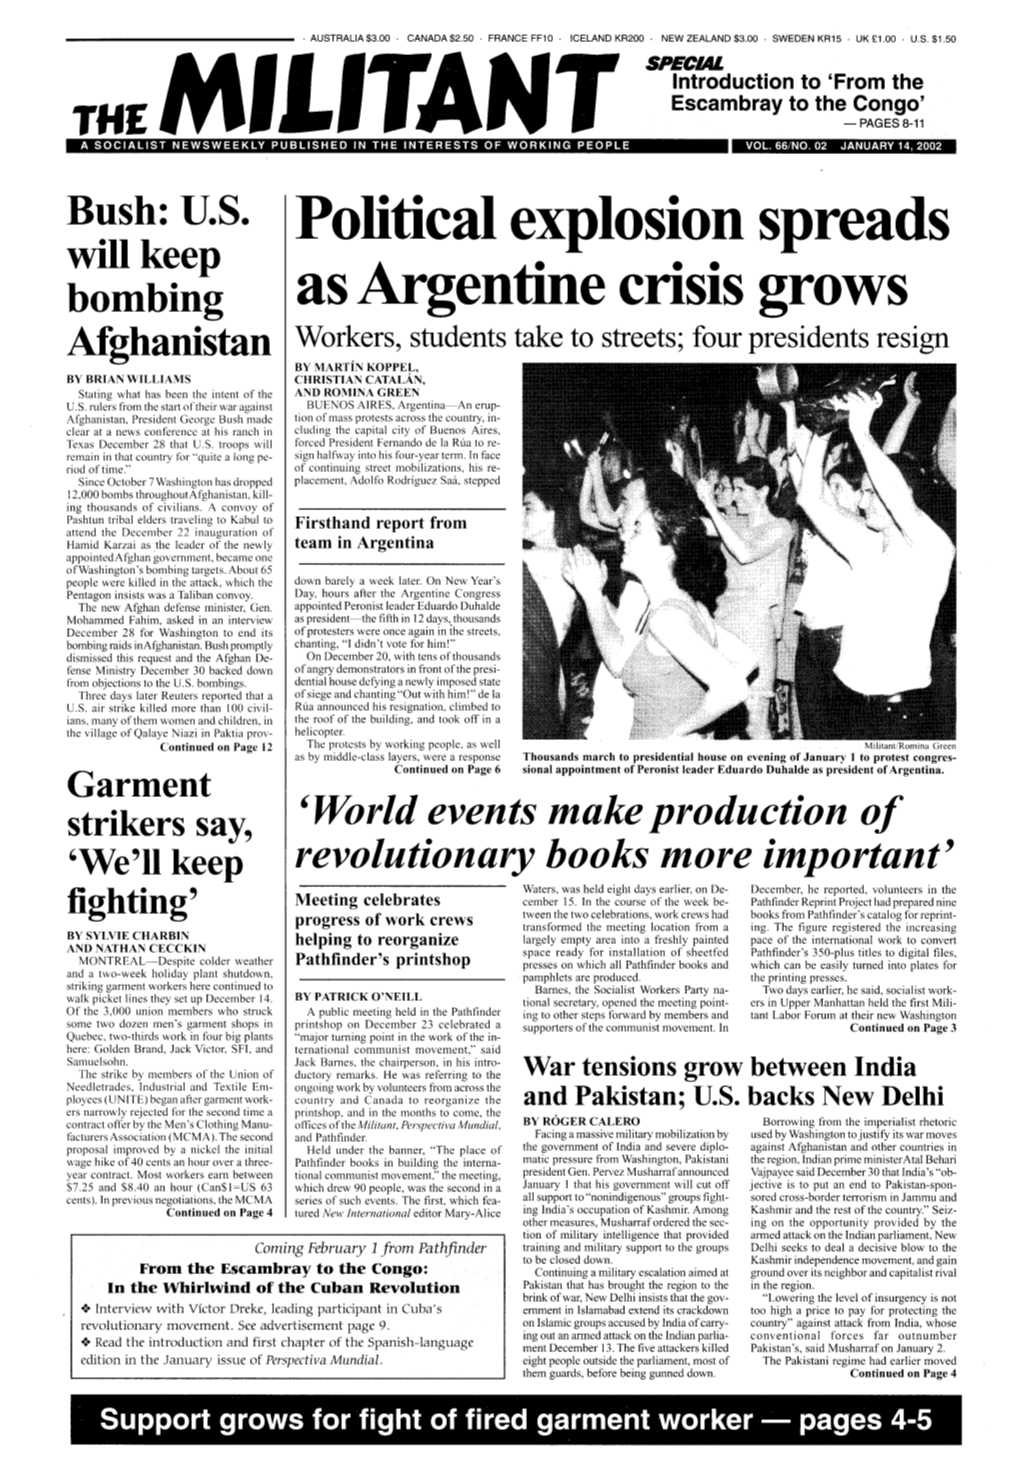 Political Explosion Spreads As Argentine Crisis Grows